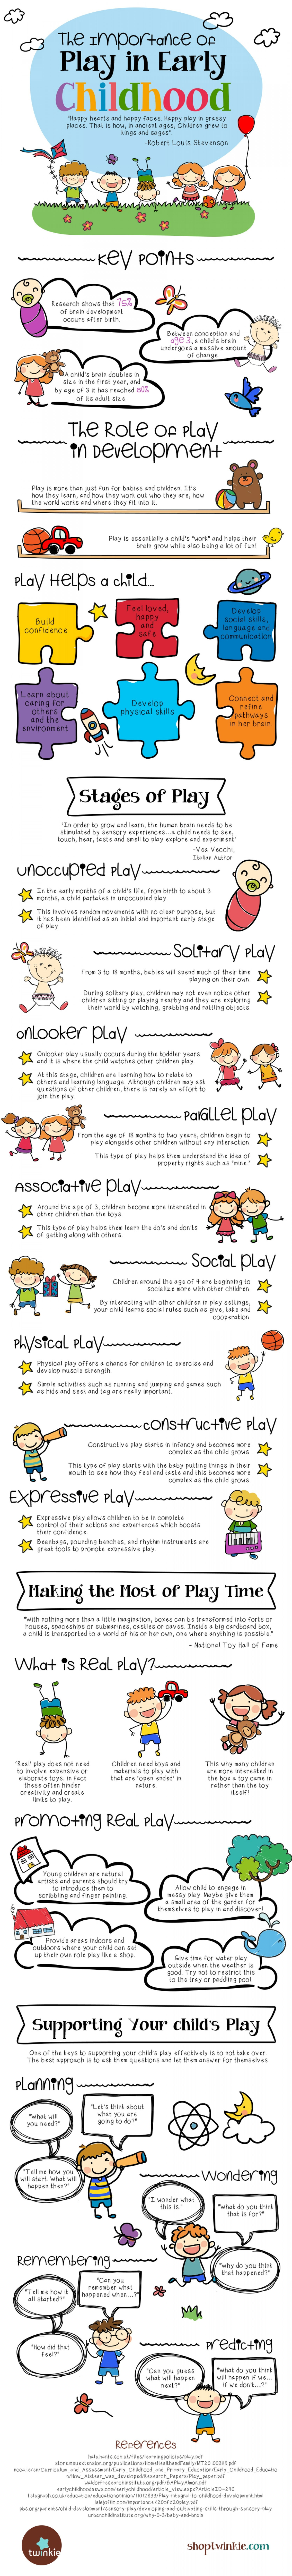 Importance of Play infographic